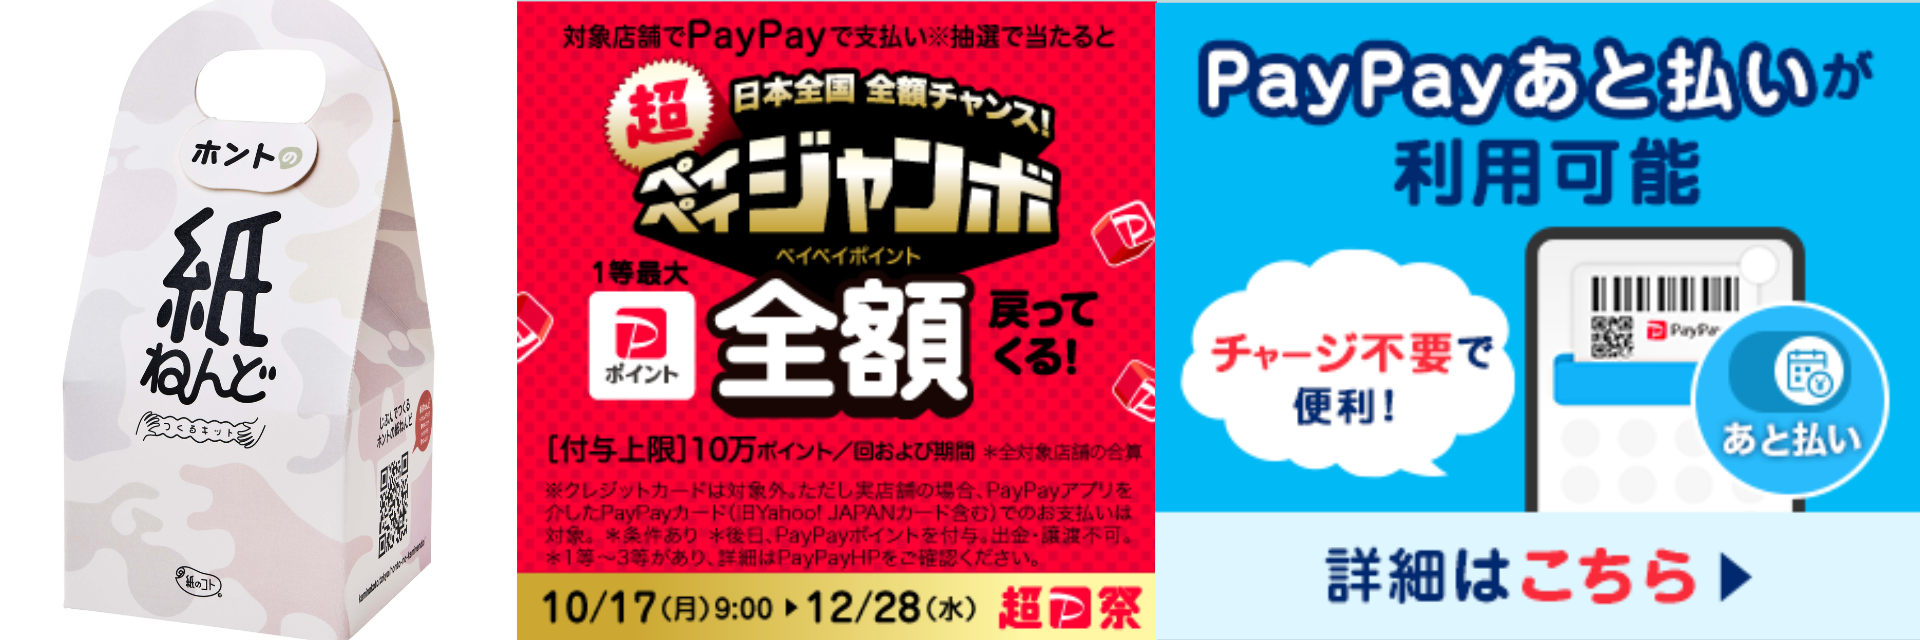 paypay4.png